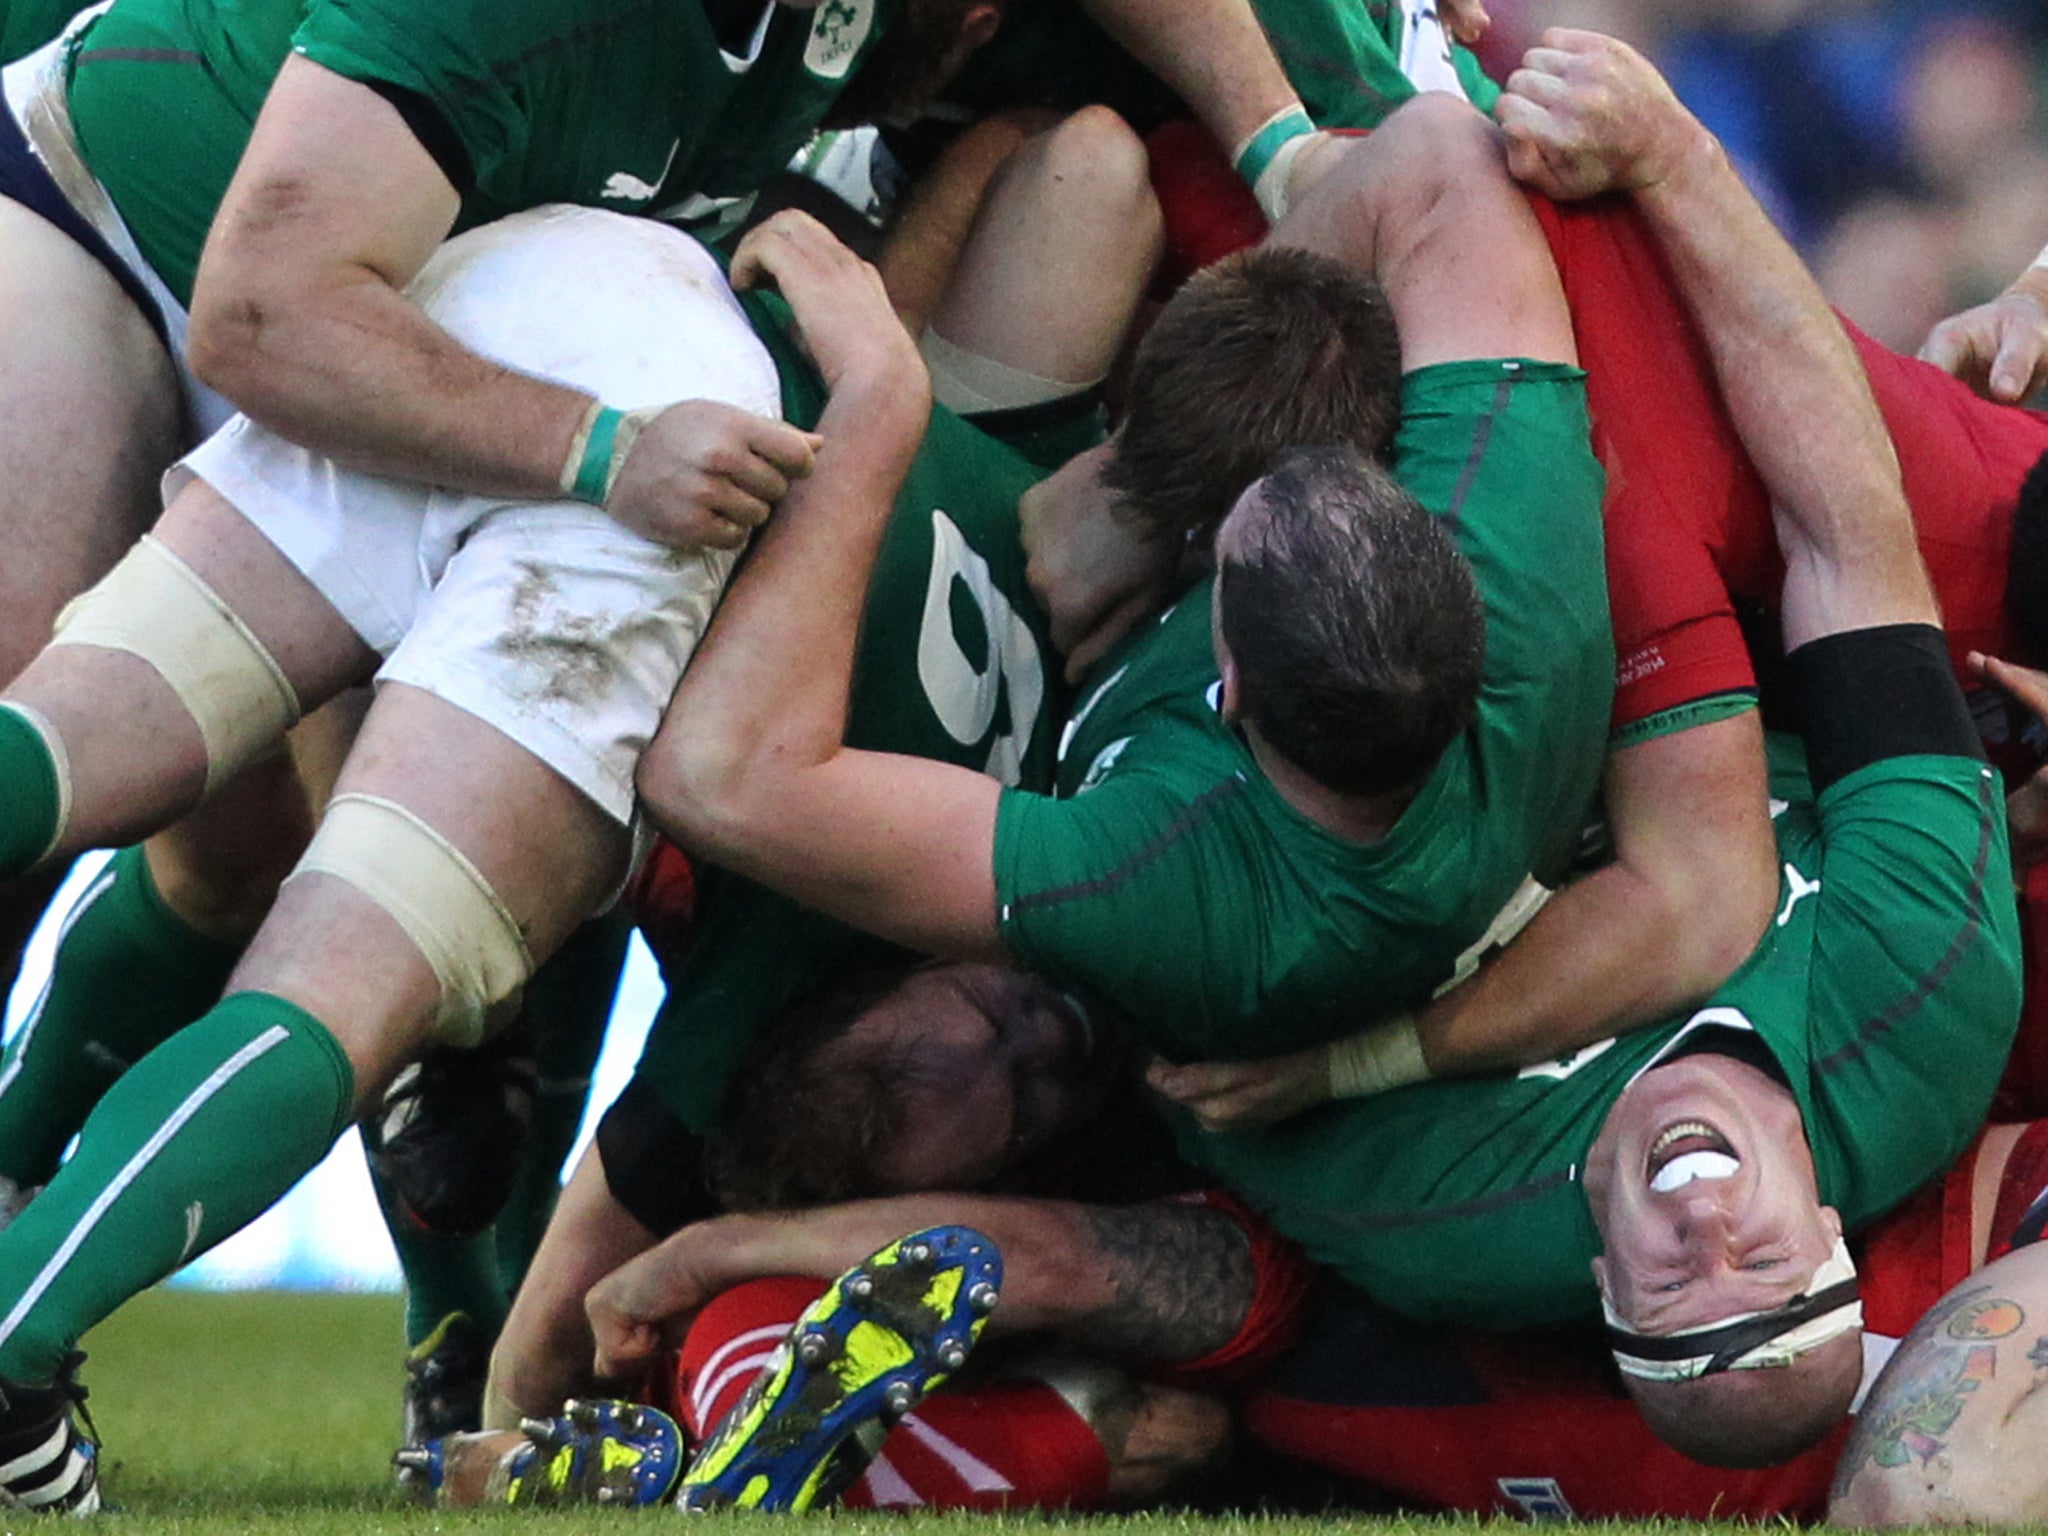 Paul O'Connell grimaces in a ruck during Ireland's 26-3 victory over Wales